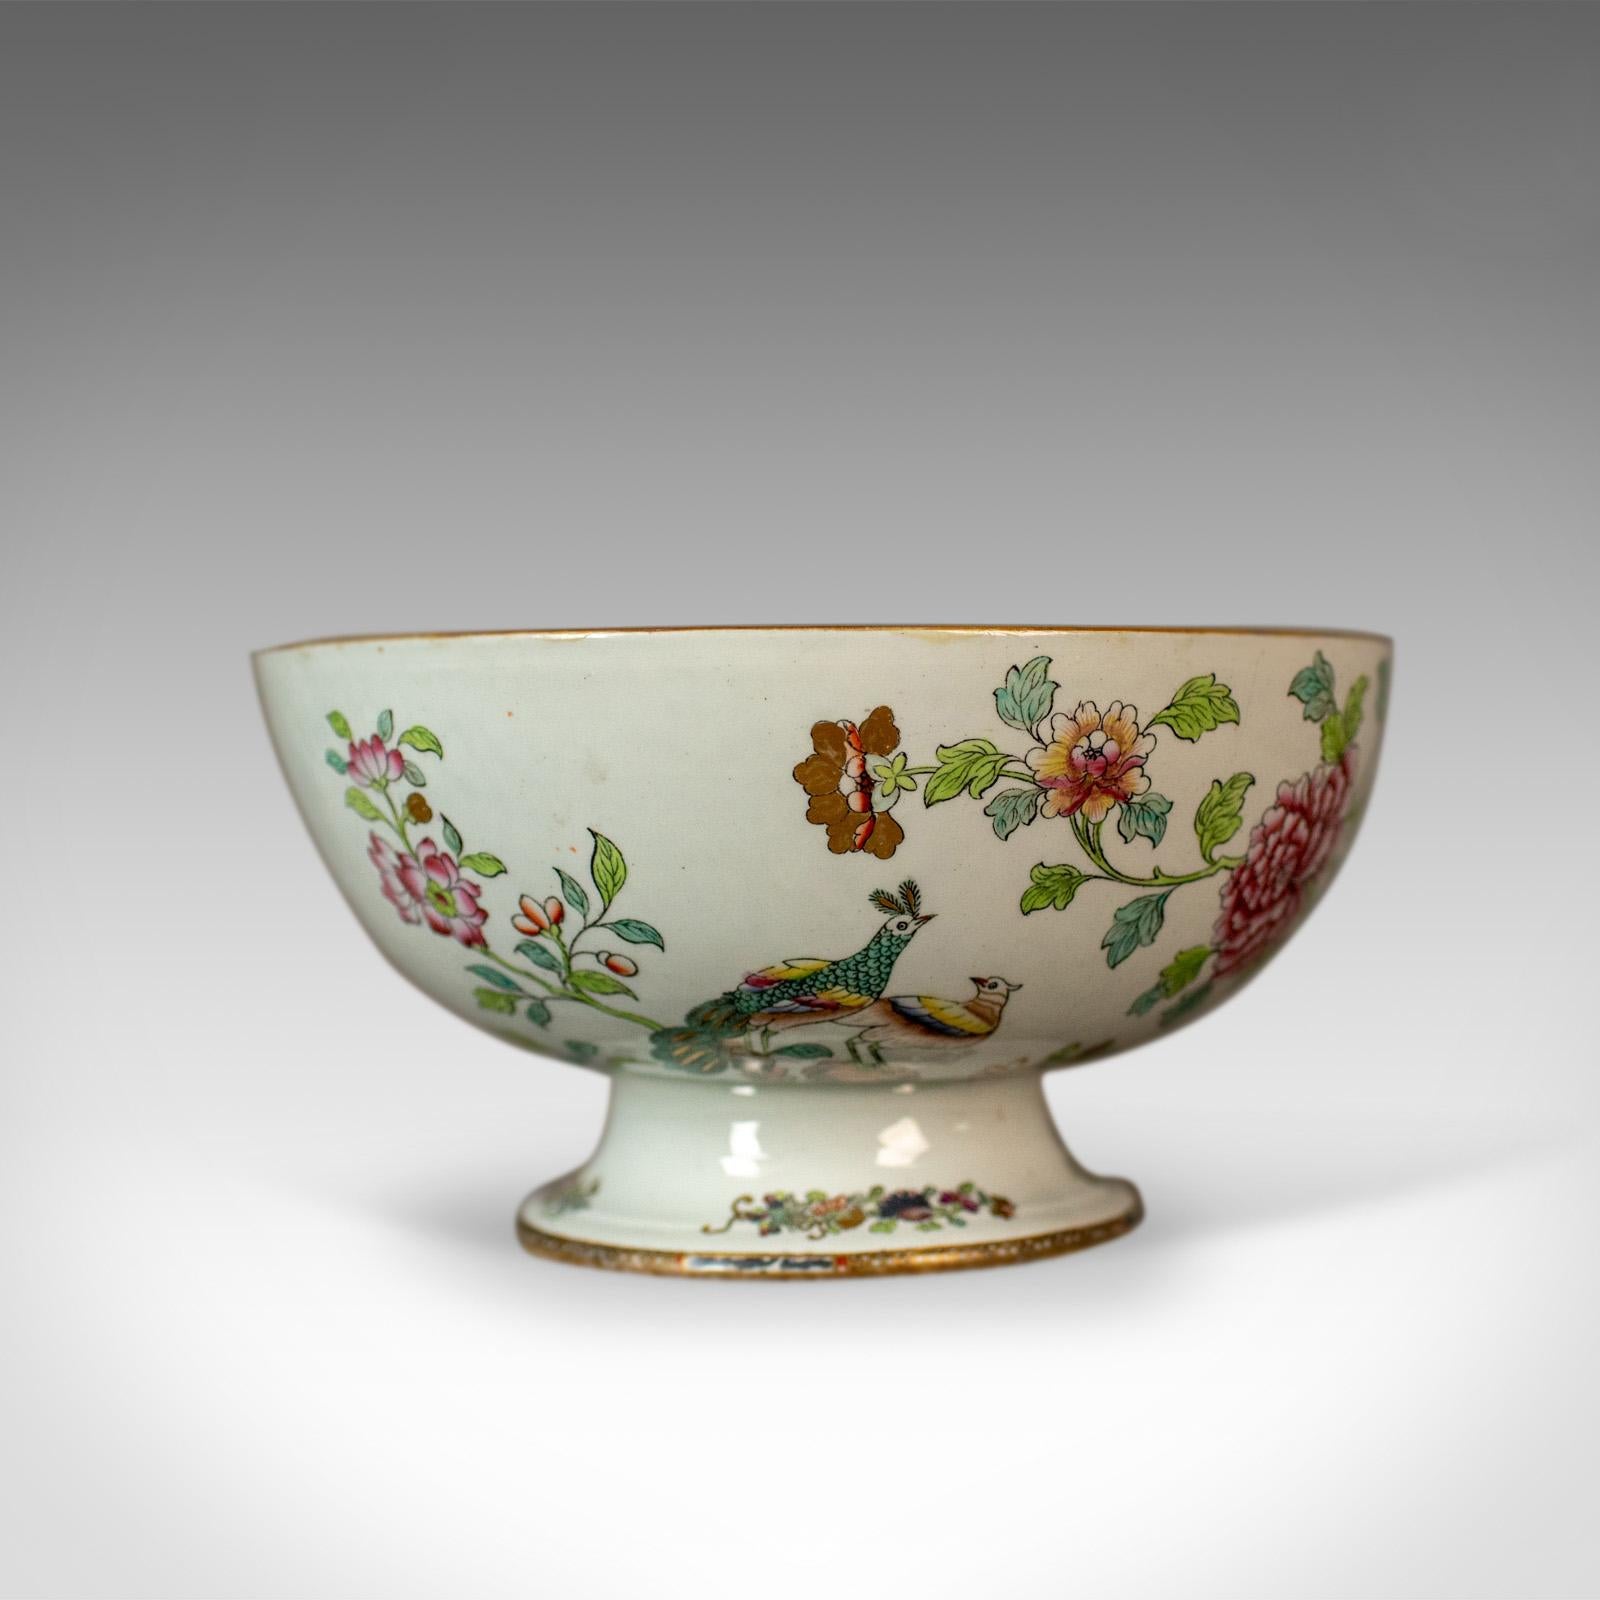 This is an antique ironstone bowl, a 19th century, Victorian, chinoiserie ceramic bowl.

An attractive bowl with a maker's mark to the base
In good condition throughout
Painted with a floral scene and peacocks
Highlighted with gold
The theme